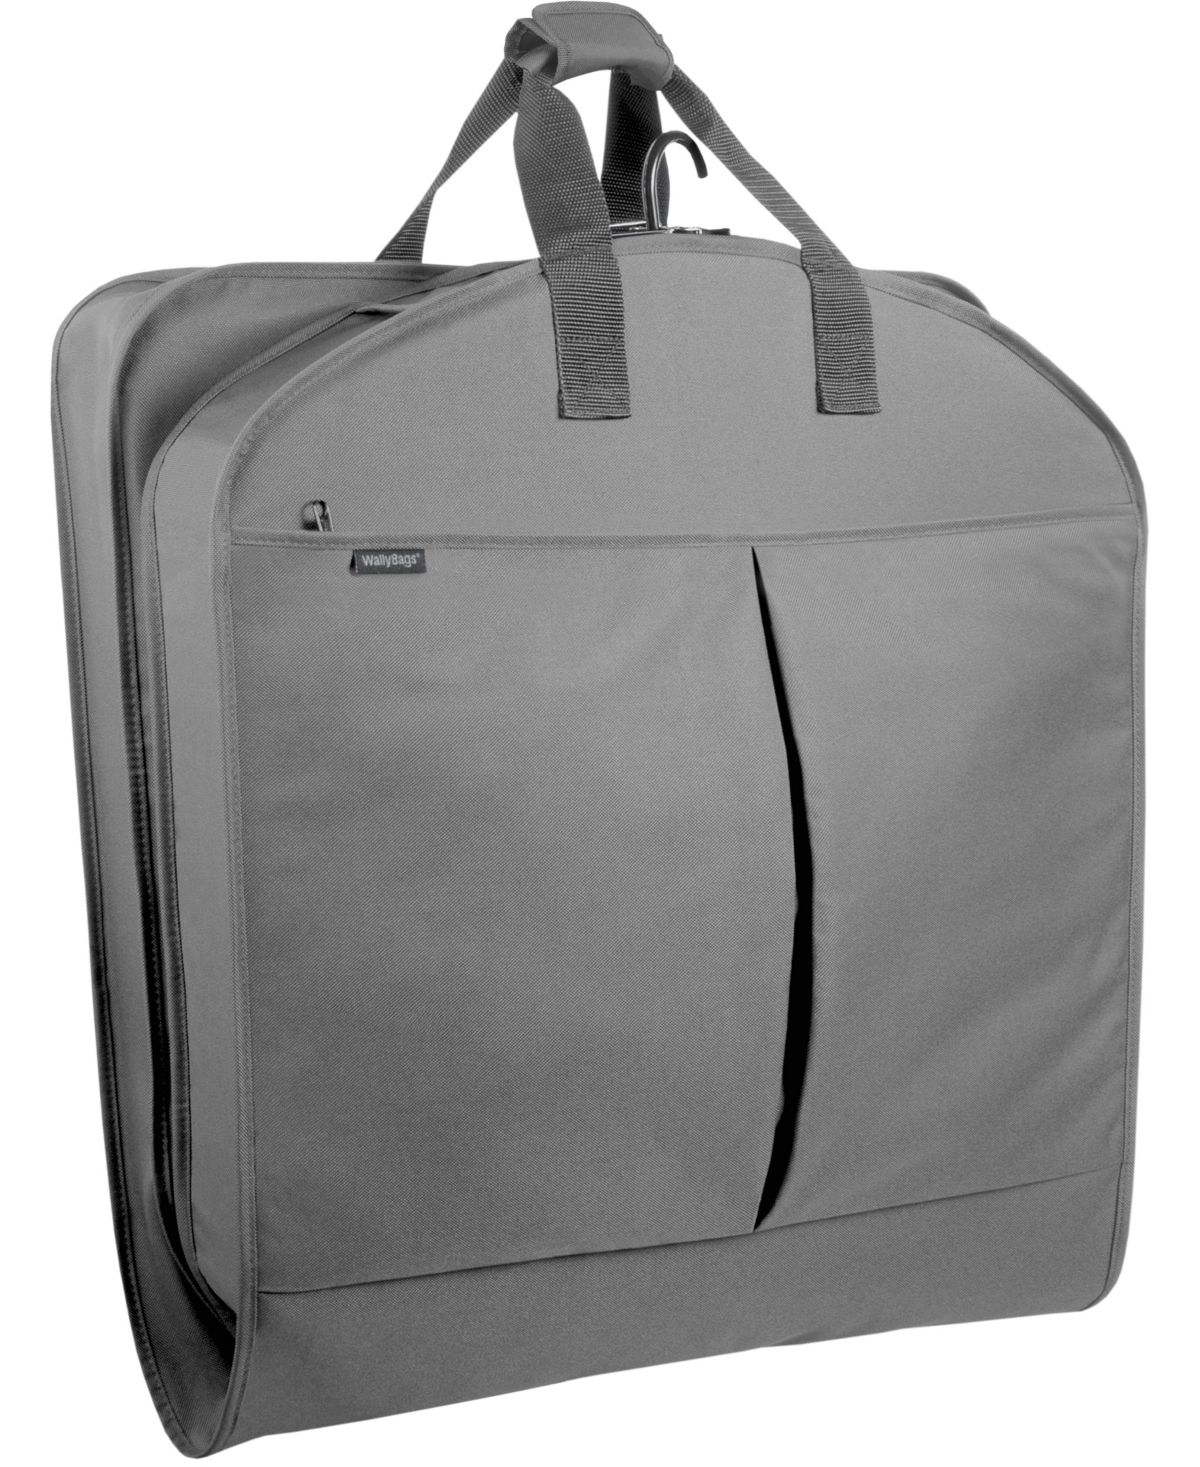 Wallybags 45" Deluxe Extra Capacity Travel Garment Bag With Accessory Pockets In Gray